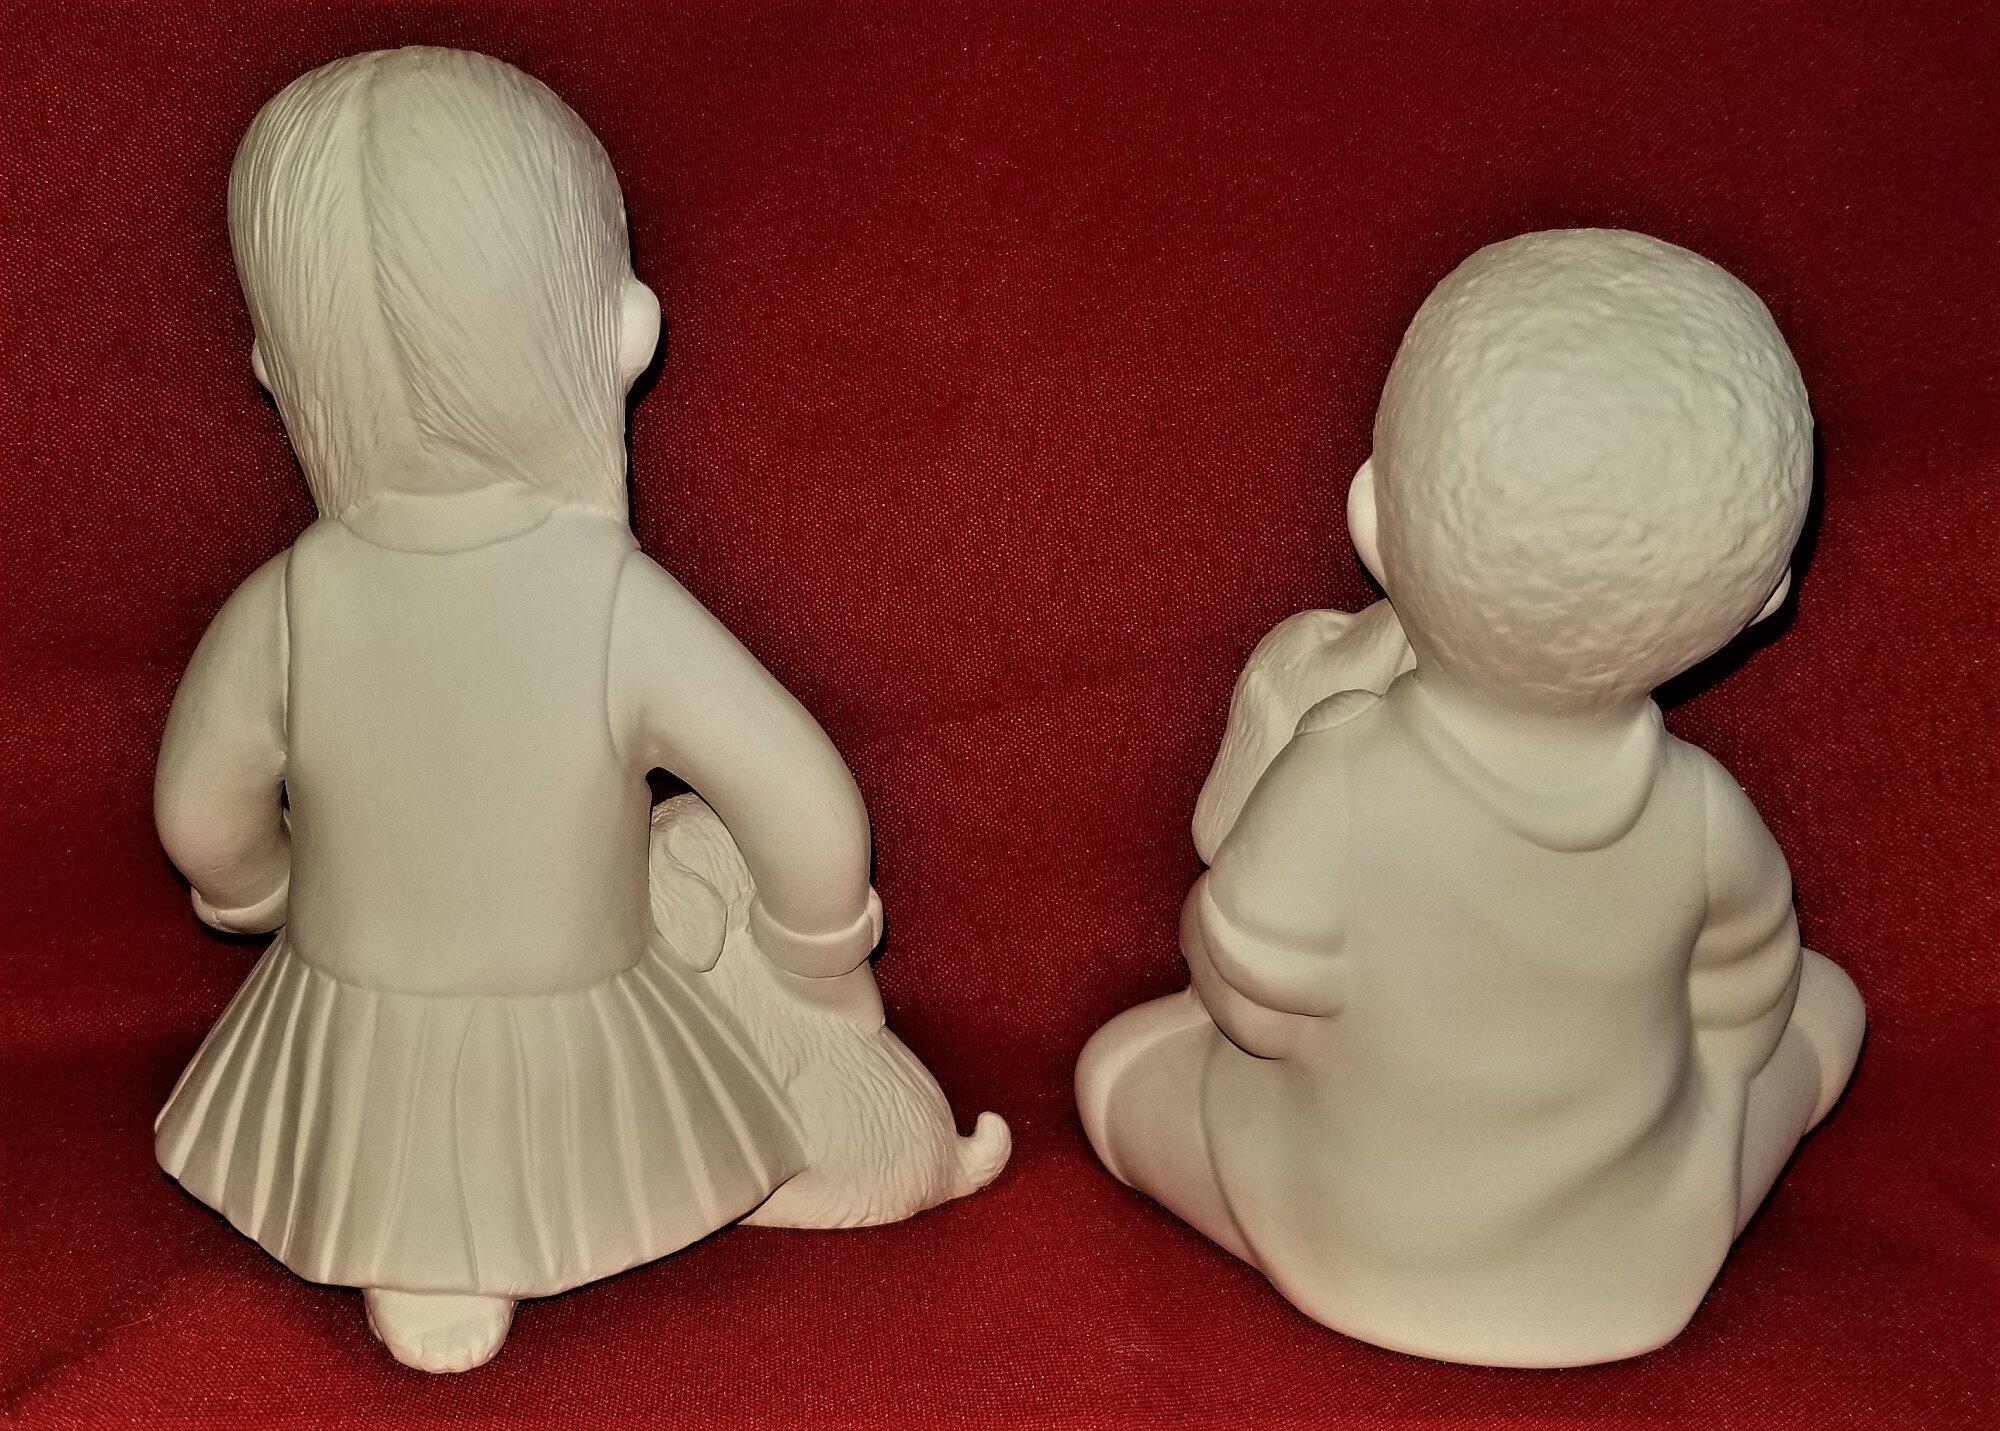 Ceramic Boy and Girl Figurines.ready-to-paint Unpainted Figurines